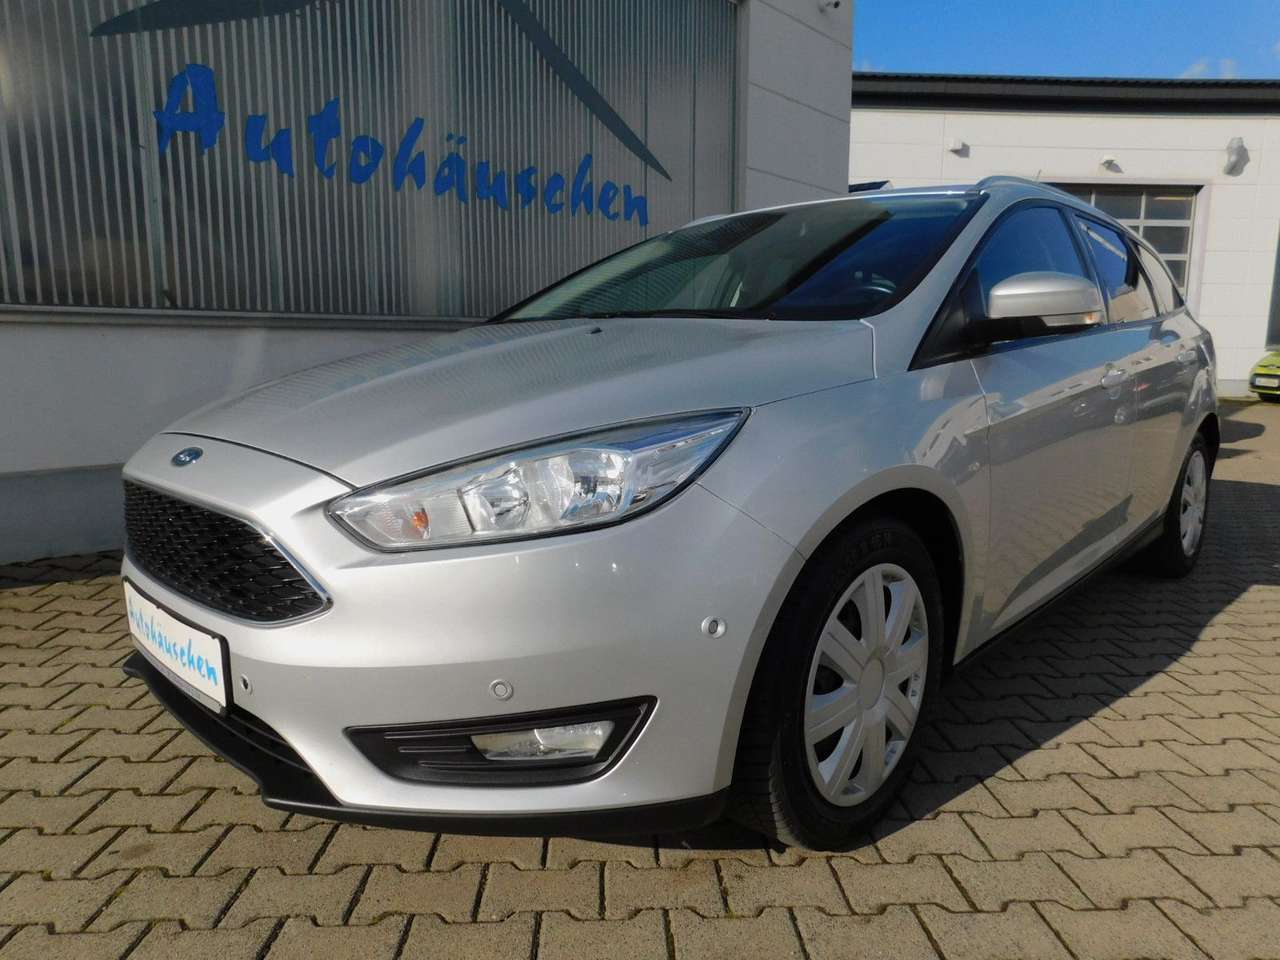 Used Ford Focus 1.0 EcoBoost